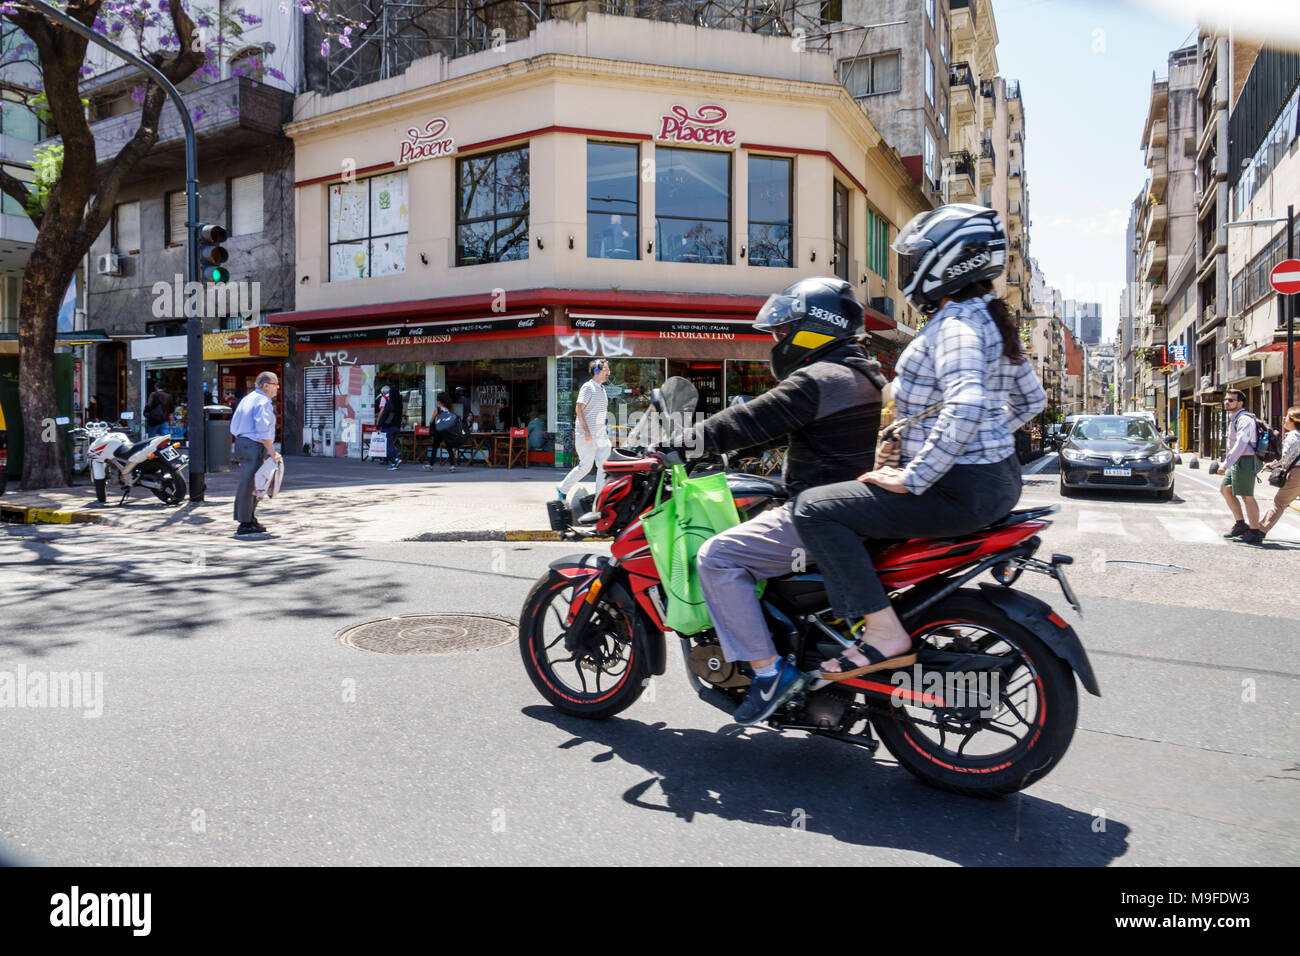 Buenos Aires Argentina,traffic,adult adults man men male,woman women female lady,street,motorcycle motorcycles,riding,two-up rider,helmet,adult adults Stock Photo